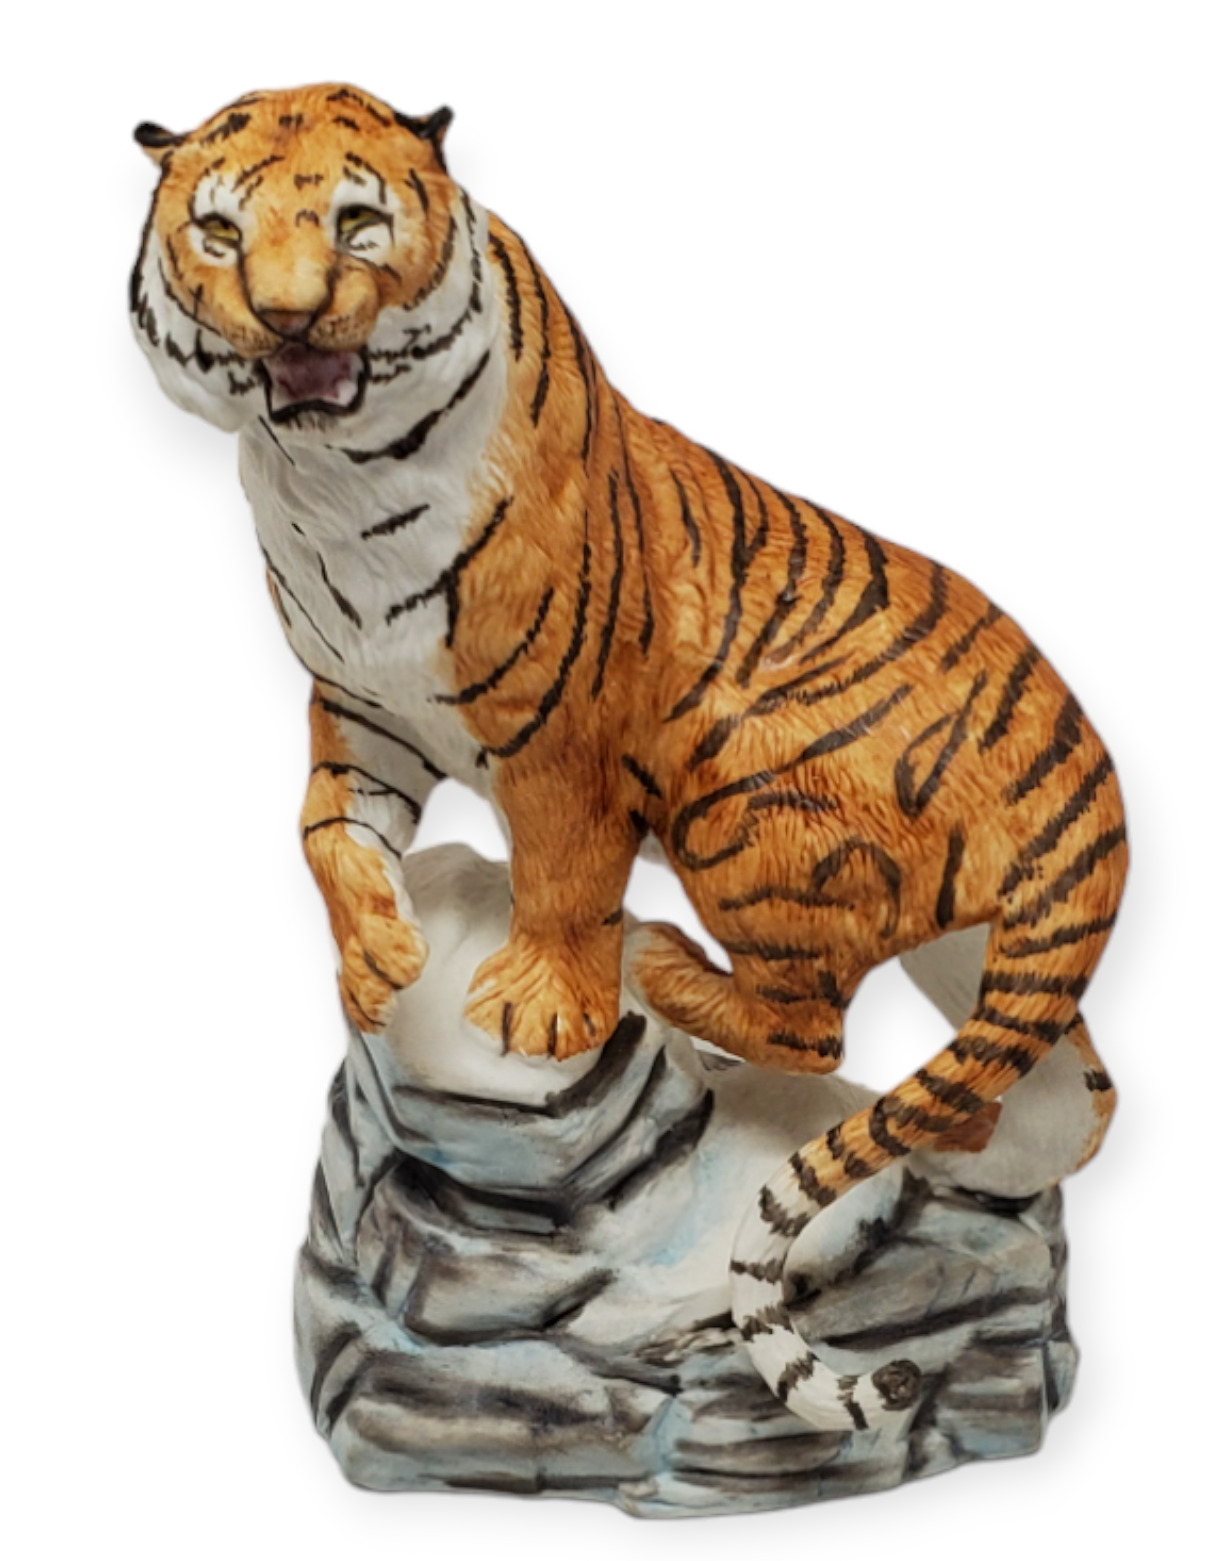 Franklin Mint - Great Cats of the World NWF - Siberian Tiger Figurine 1989